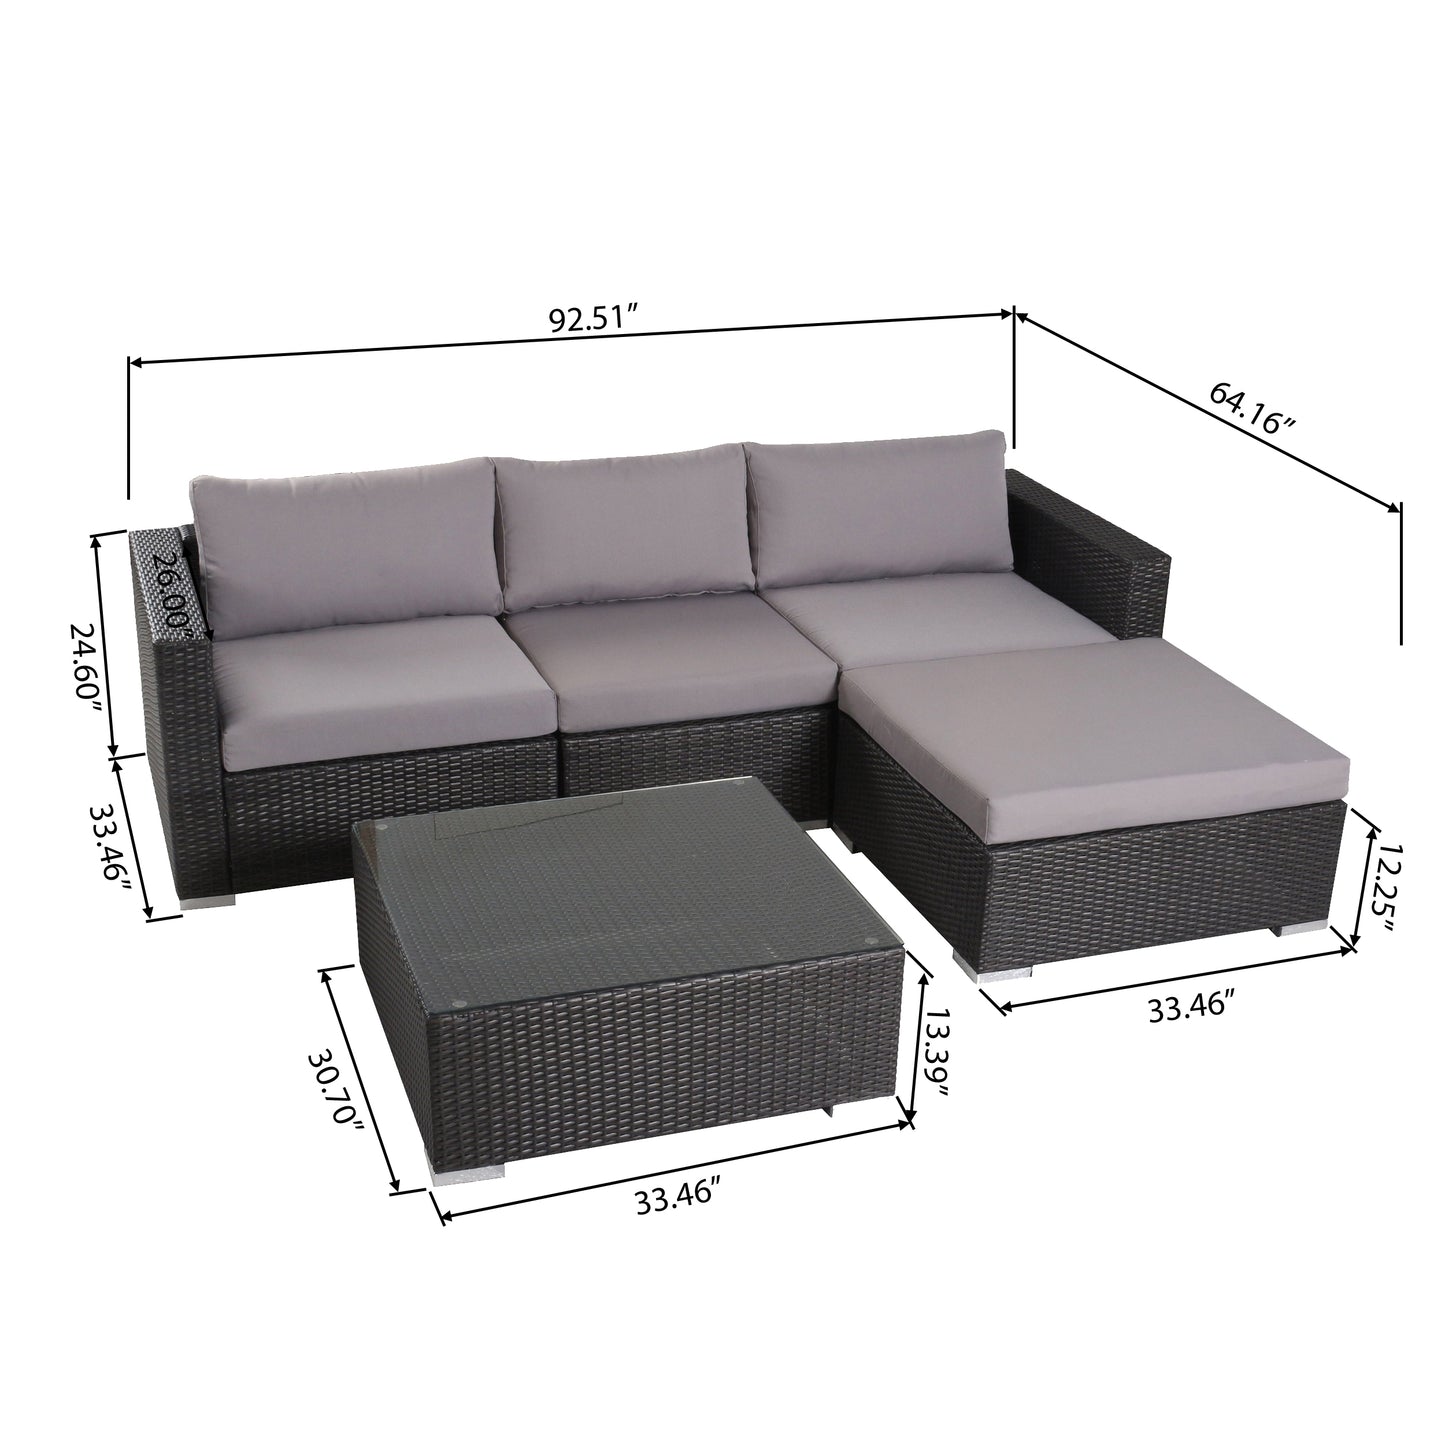 Francisco 5pc Outdoor Gray Wicker Seating Sectional Set w/ Cushions